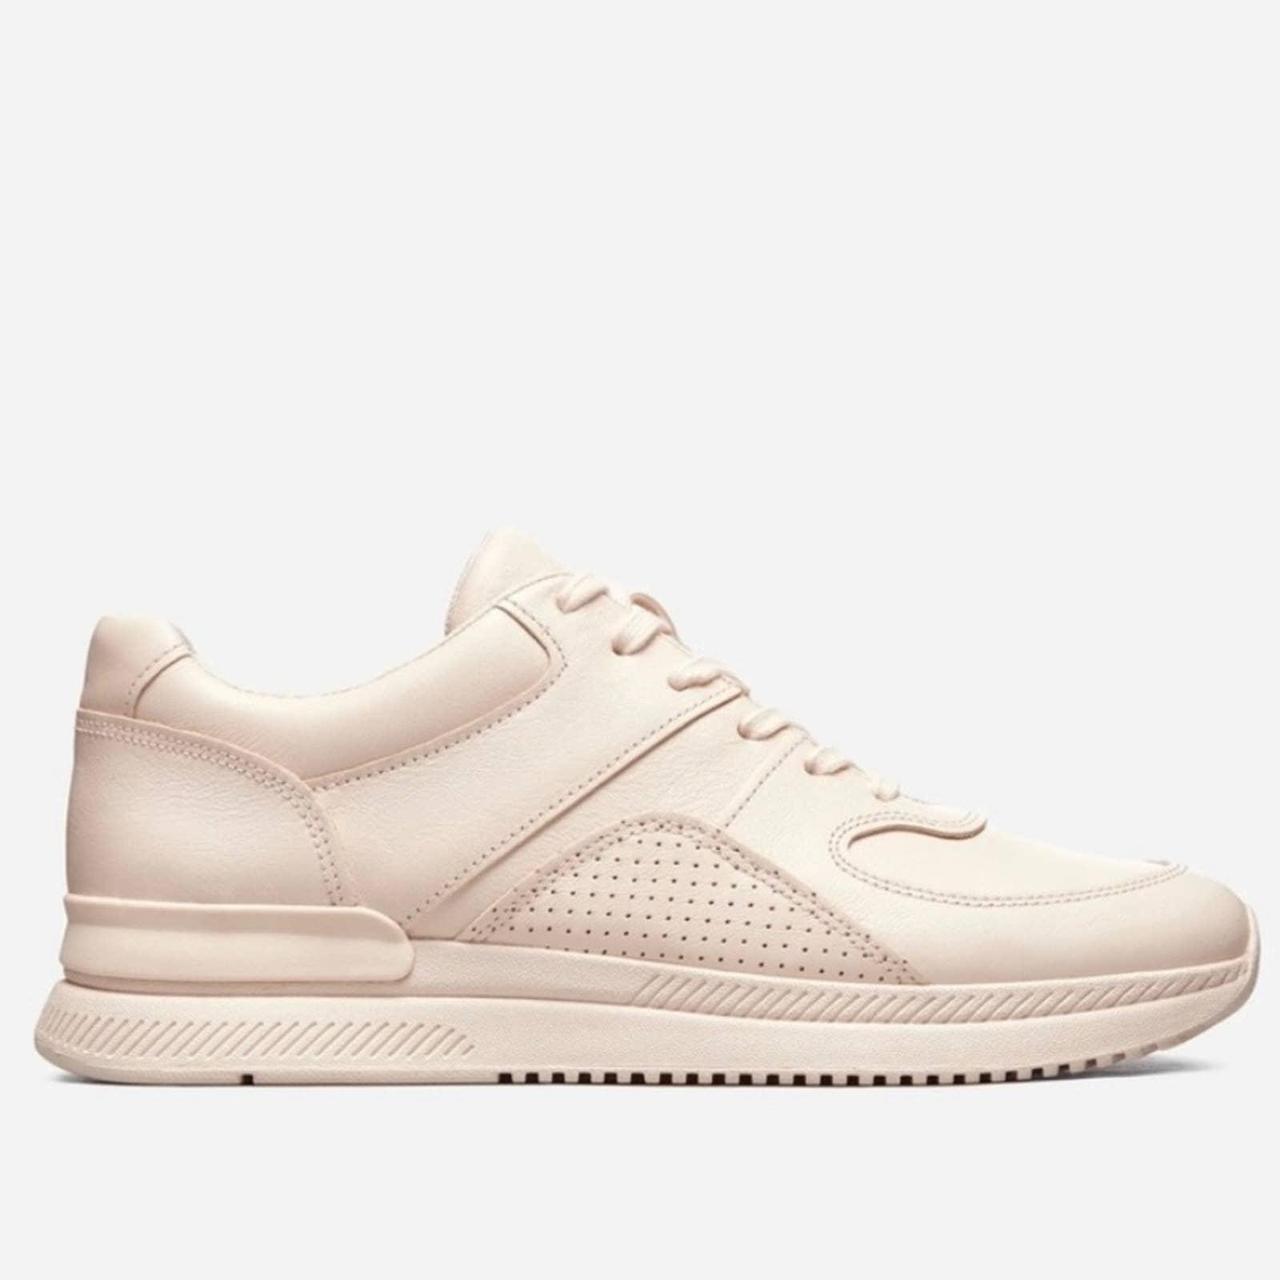 NWB Everlane The Trainer Leather Lace Up Sneaker in Blush Pink, Size 13.5